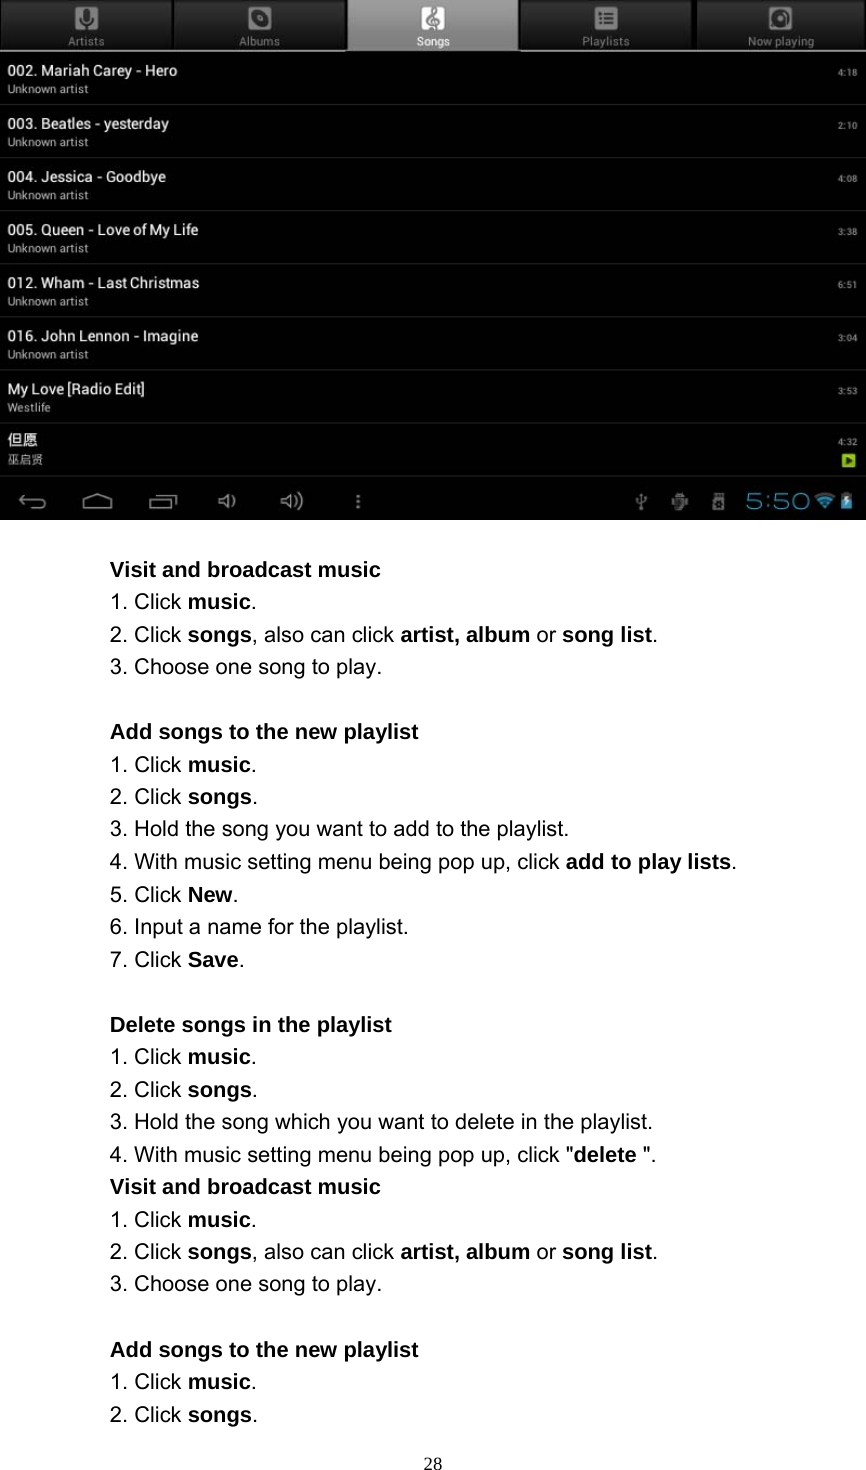    28    Visit and broadcast music 1. Click music. 2. Click songs, also can click artist, album or song list. 3. Choose one song to play.  Add songs to the new playlist 1. Click music. 2. Click songs. 3. Hold the song you want to add to the playlist. 4. With music setting menu being pop up, click add to play lists. 5. Click New. 6. Input a name for the playlist. 7. Click Save.  Delete songs in the playlist 1. Click music. 2. Click songs. 3. Hold the song which you want to delete in the playlist. 4. With music setting menu being pop up, click &quot;delete &quot;. Visit and broadcast music 1. Click music. 2. Click songs, also can click artist, album or song list. 3. Choose one song to play.  Add songs to the new playlist 1. Click music. 2. Click songs. 